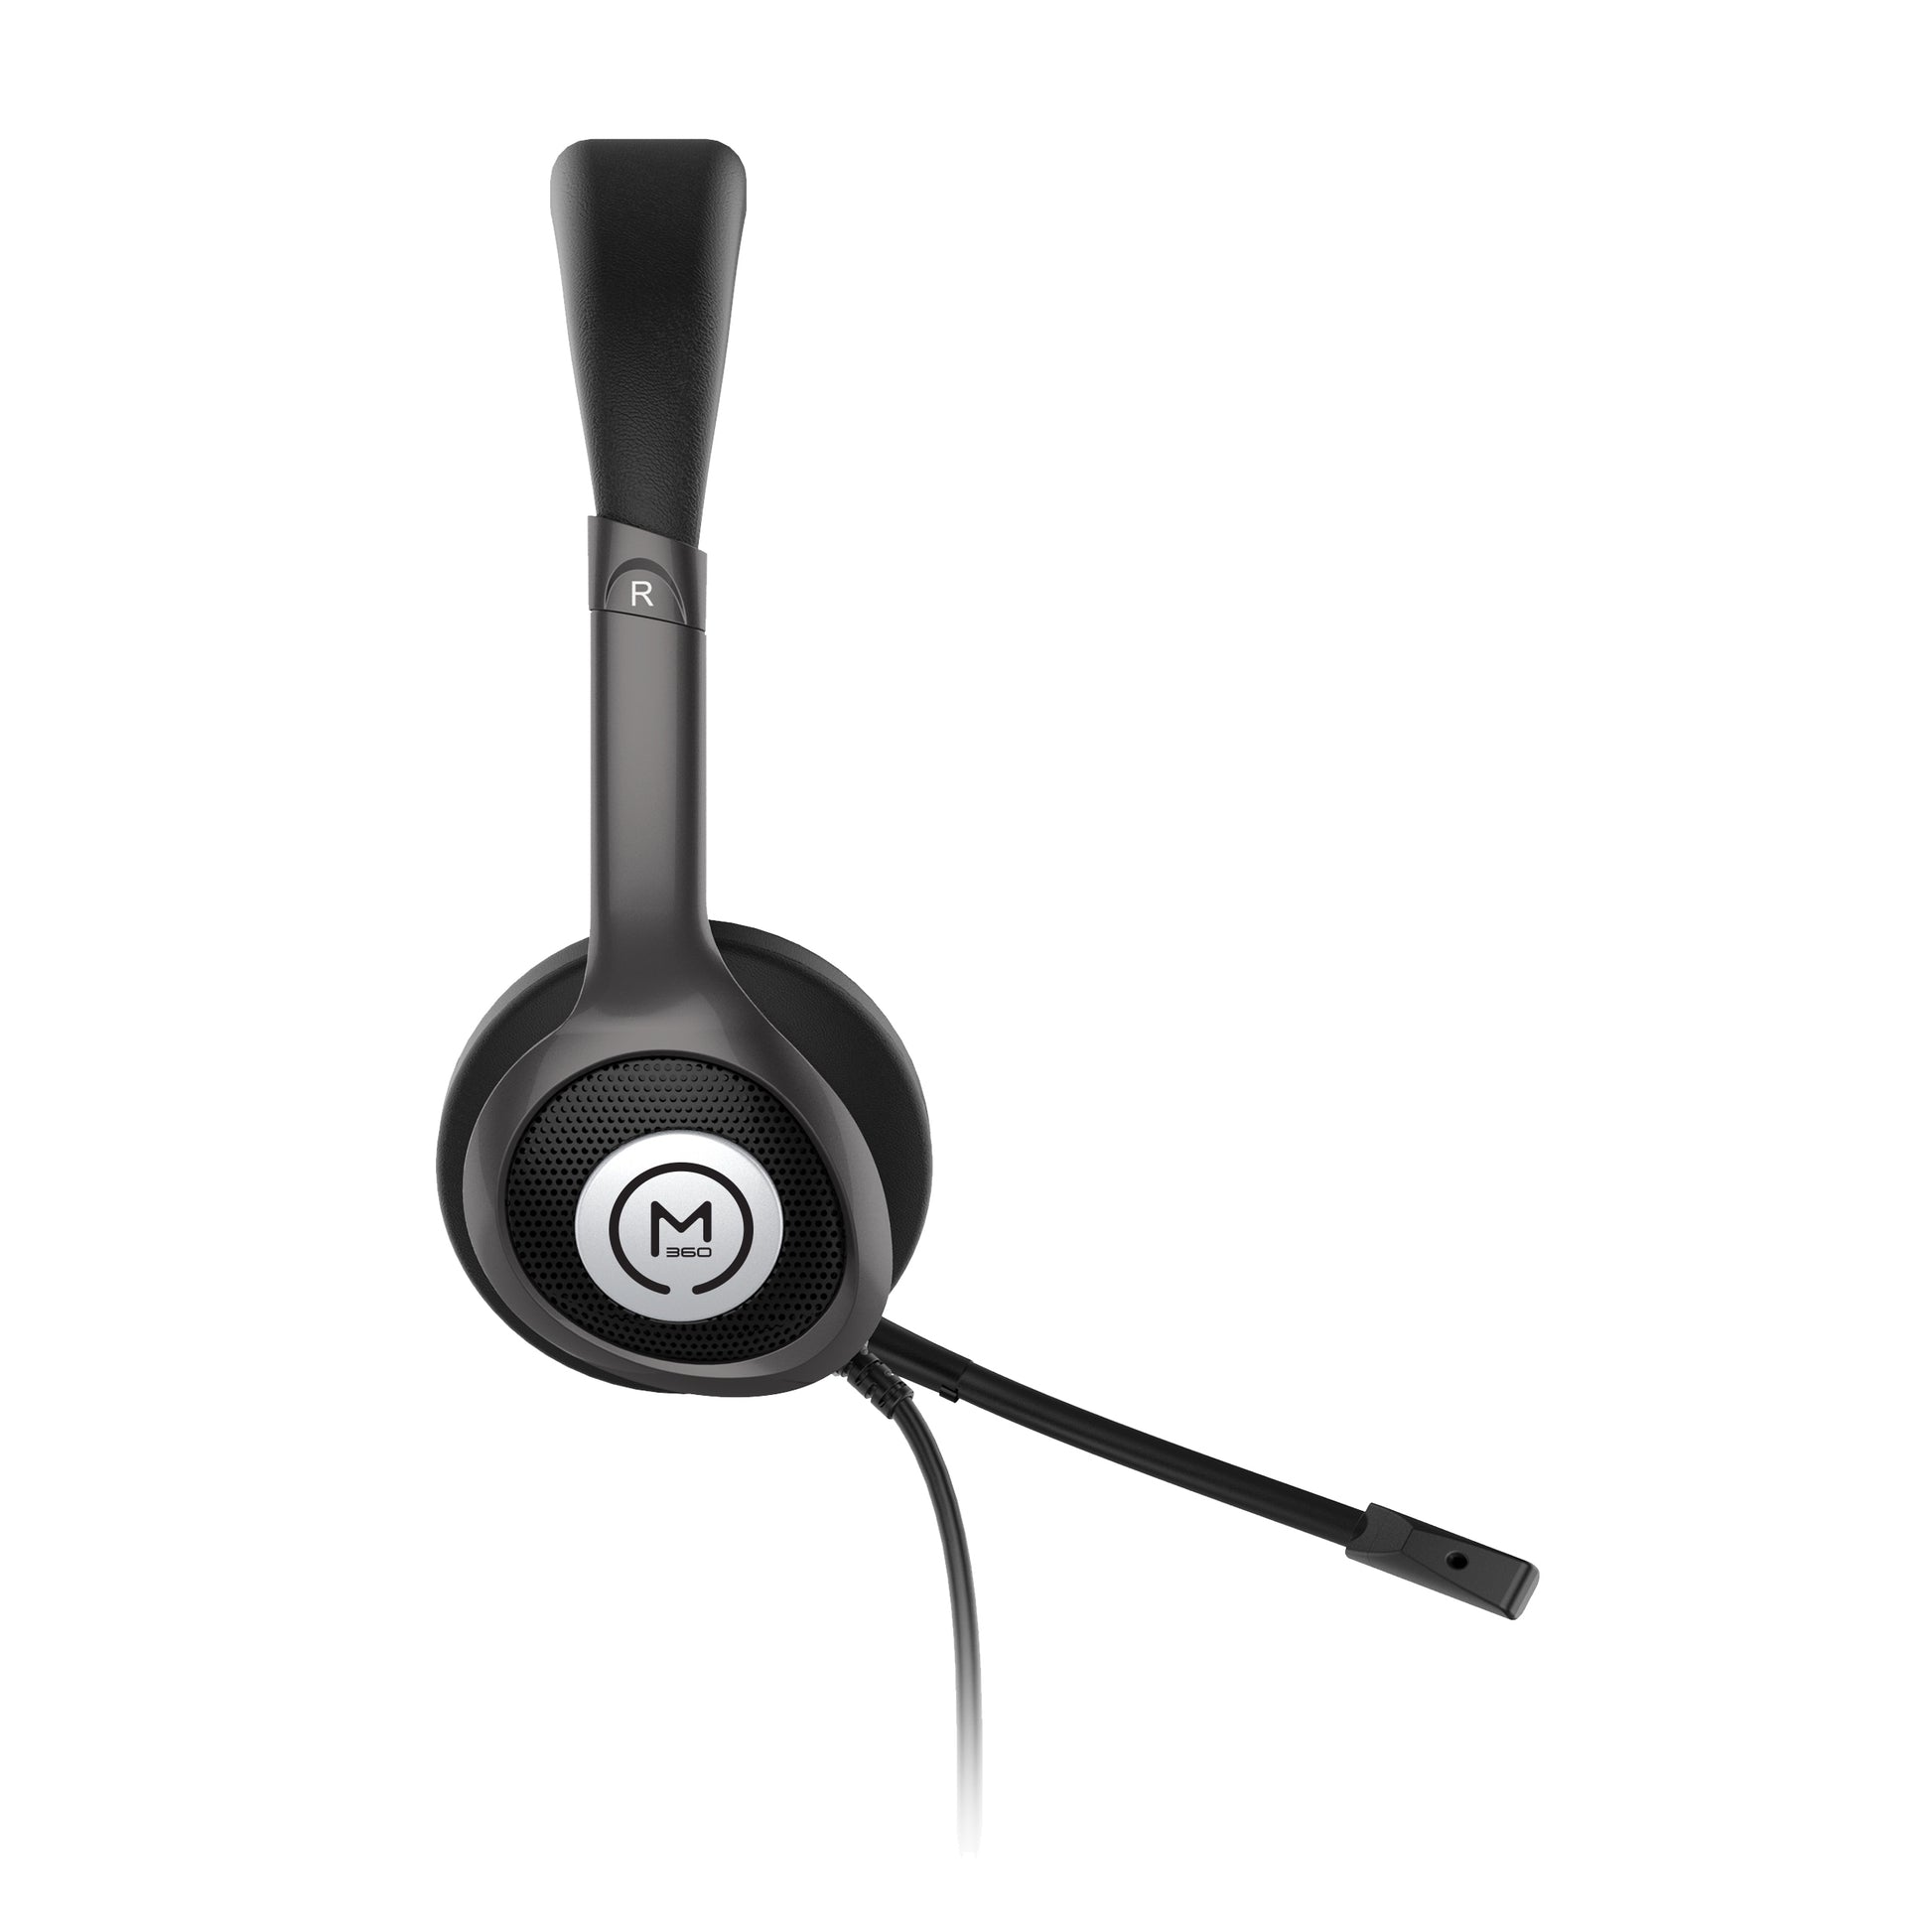 Right profile image of the Connect USB Stereo Headset with Boom Microphone